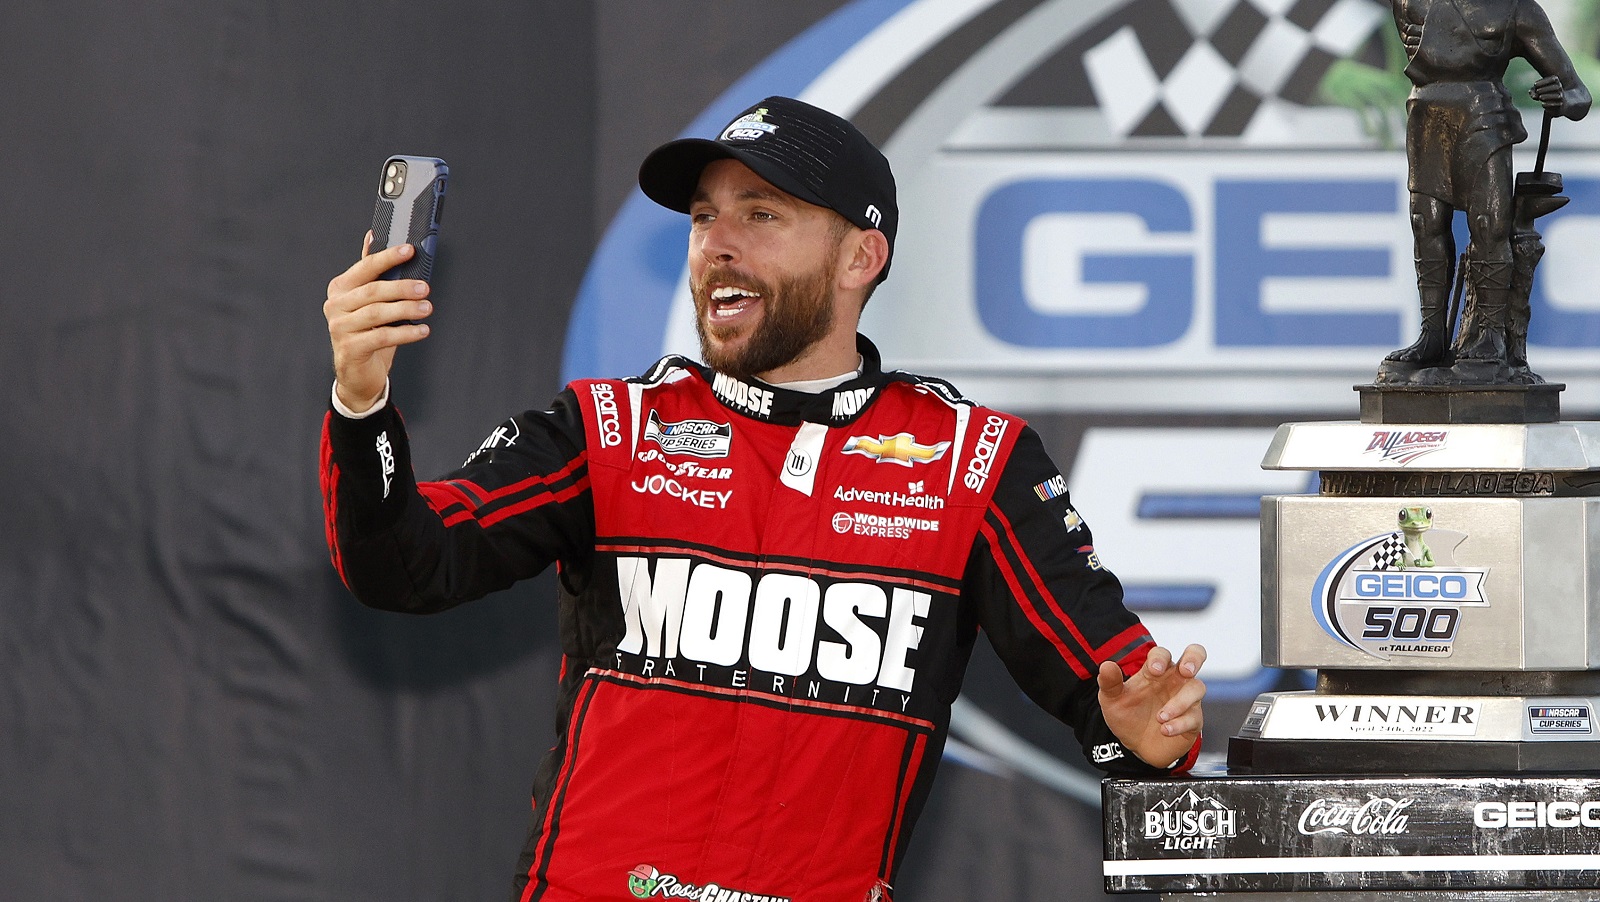 Updated 2022 NASCAR Cup Series Standings Following Ross Chastain’s Victory at Talladega